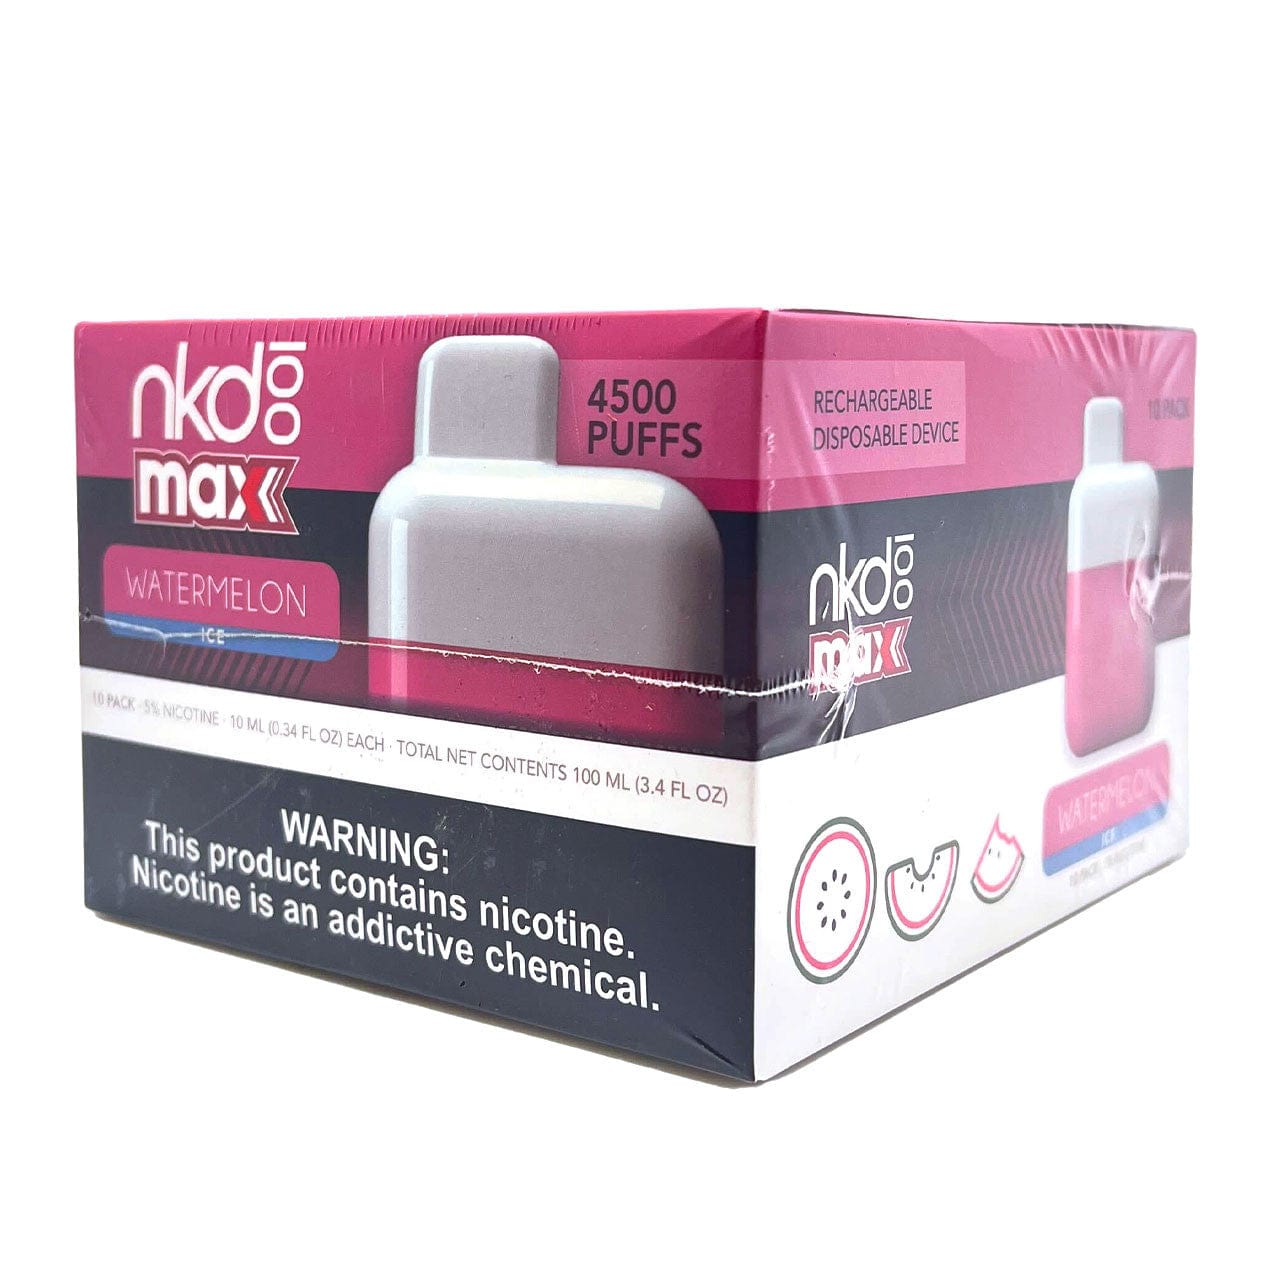 Naked 100 Max 4500 Puff Disposable Vape Wholesale 10 Pack Watermelon Ice